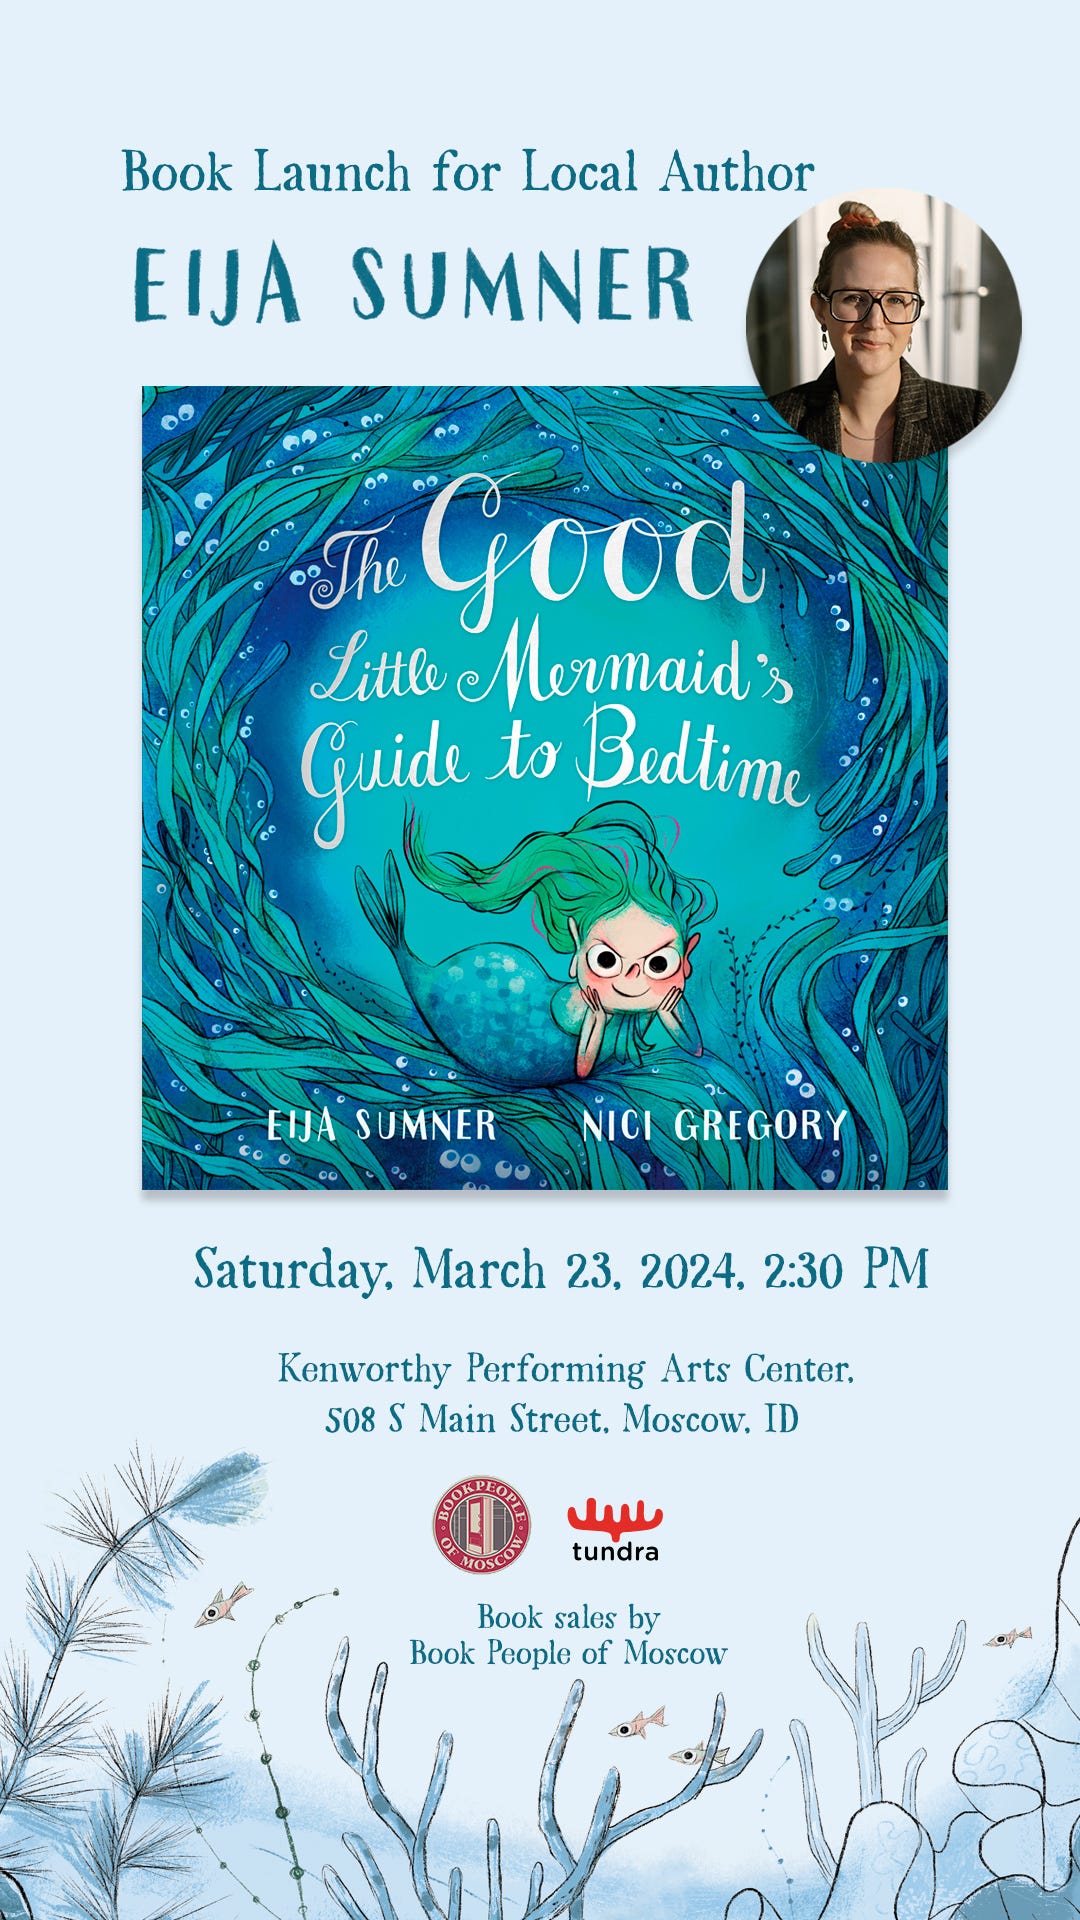 Flier story for Eija Sumner's book launch event at BookPeople of Moscow at the Kenworthy on March 23rd at 2:30pm